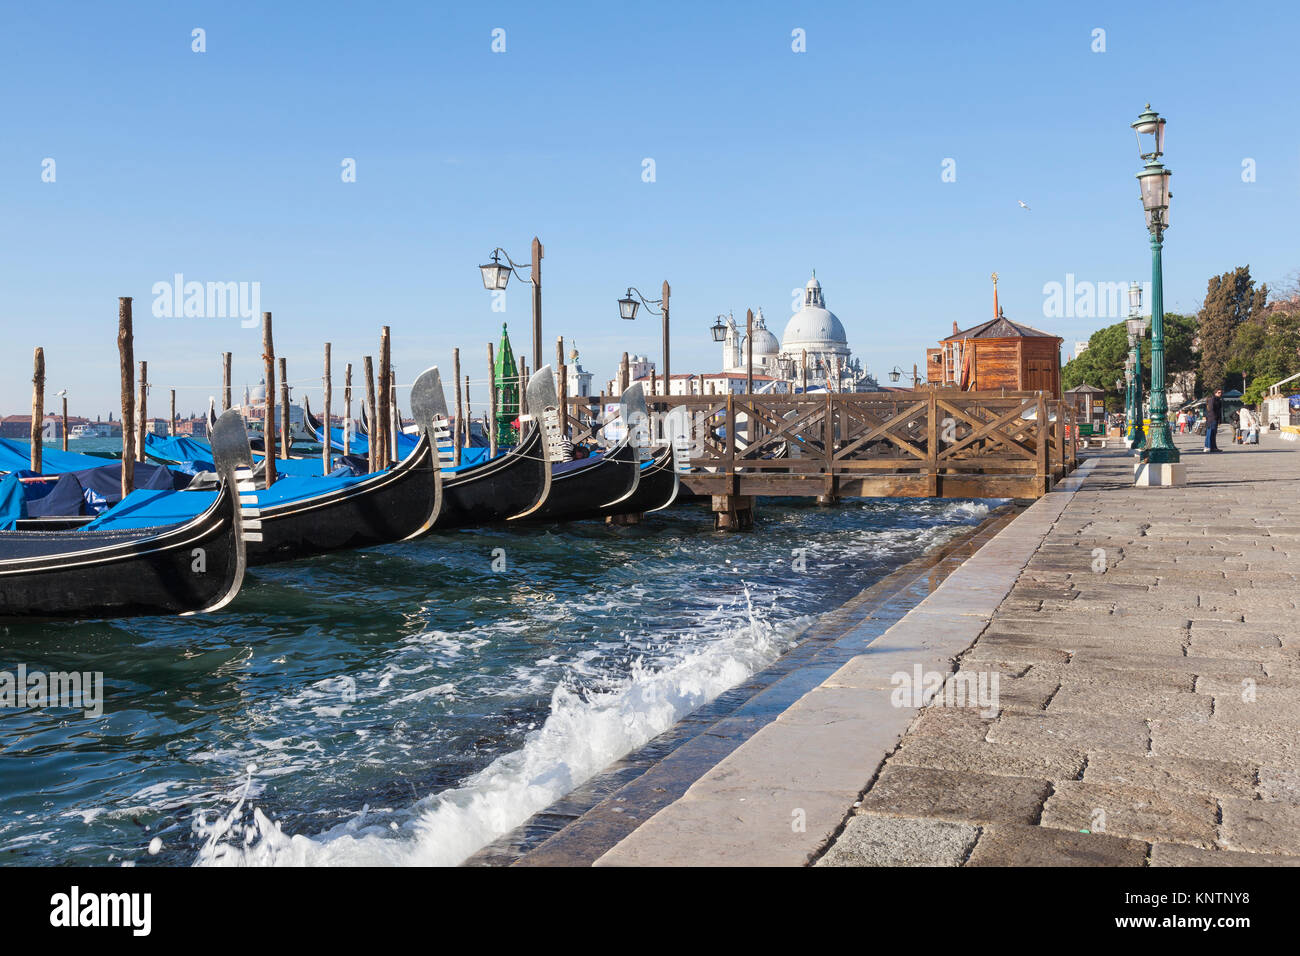 Gondolas with wave splash on an Acqua Alta high  tide, San Marco, Venice, Italy looking along the row of ferros or metal ornaments on the prow Stock Photo